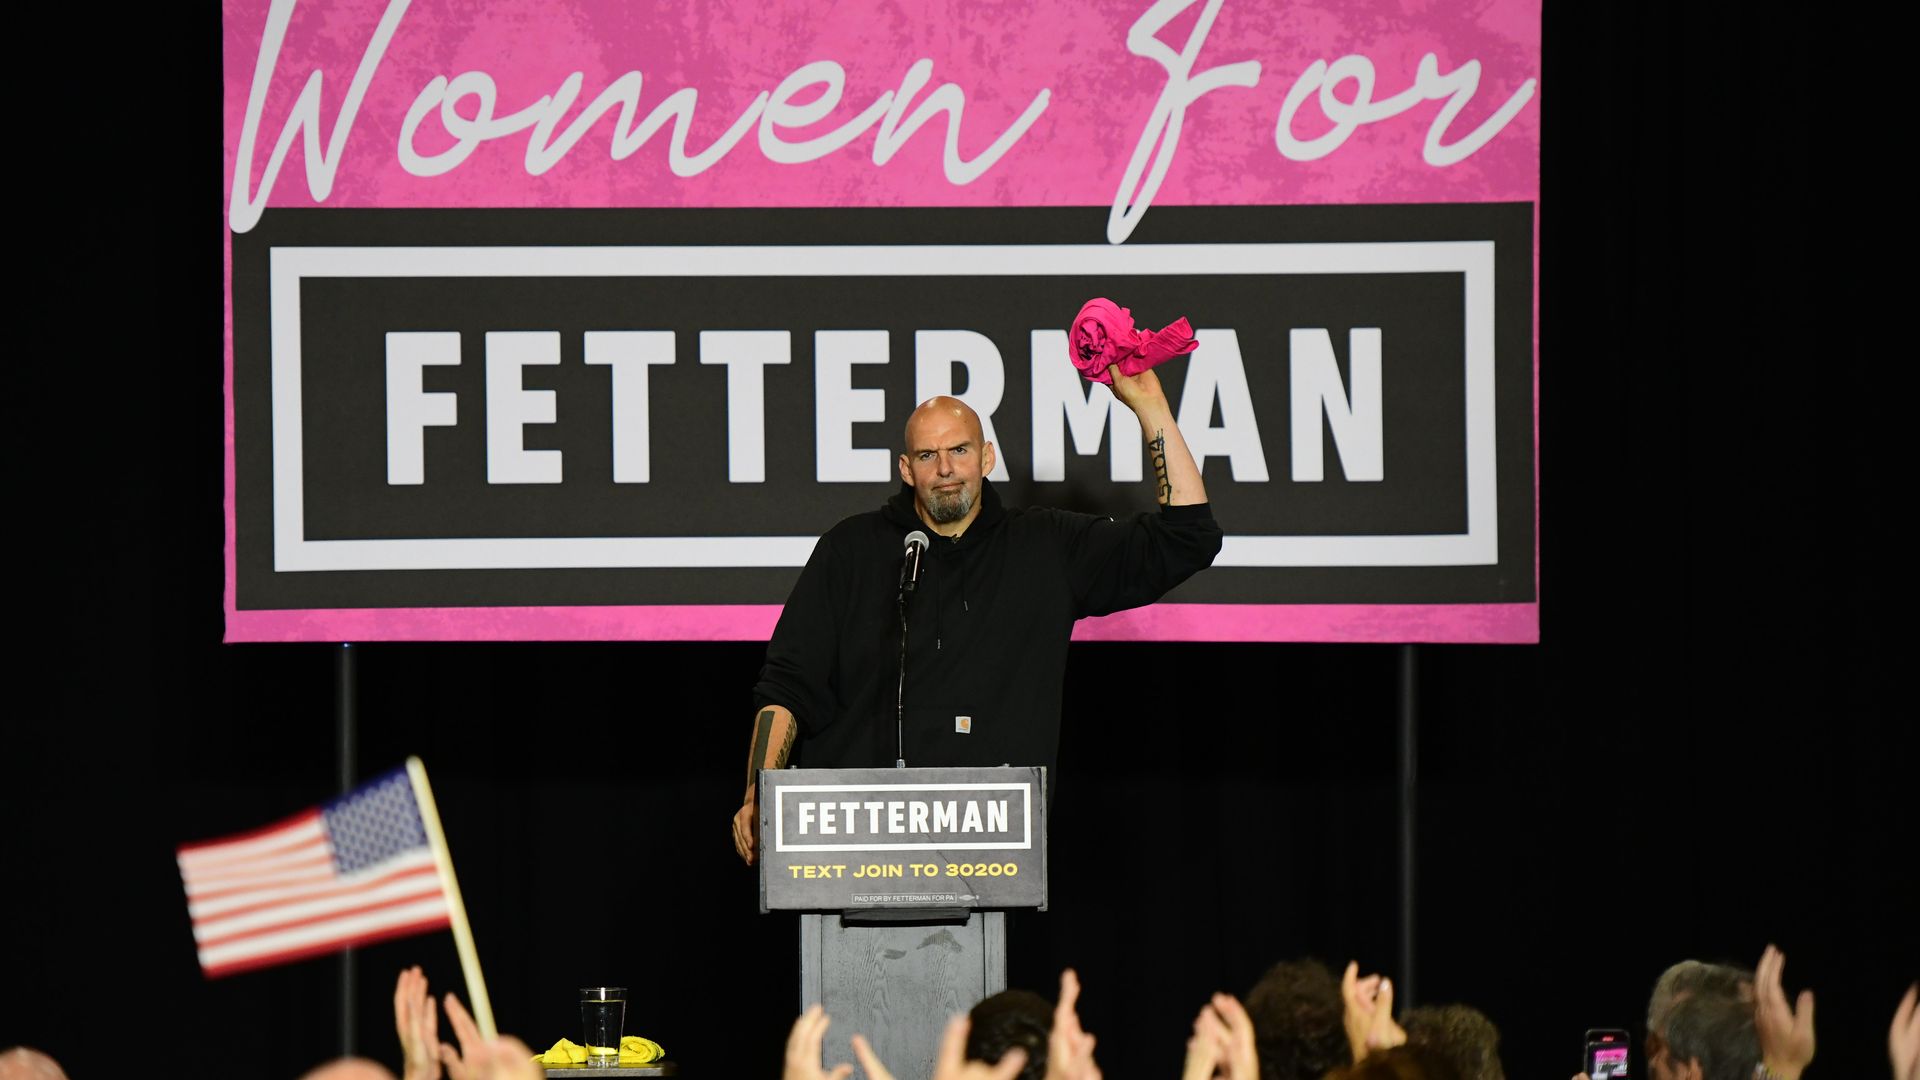 emocratic Pennsylvania Senate nominee John Fetterman prepares to throw a t-shirt that states "FETTERWOMAN" to supporters during a rally.